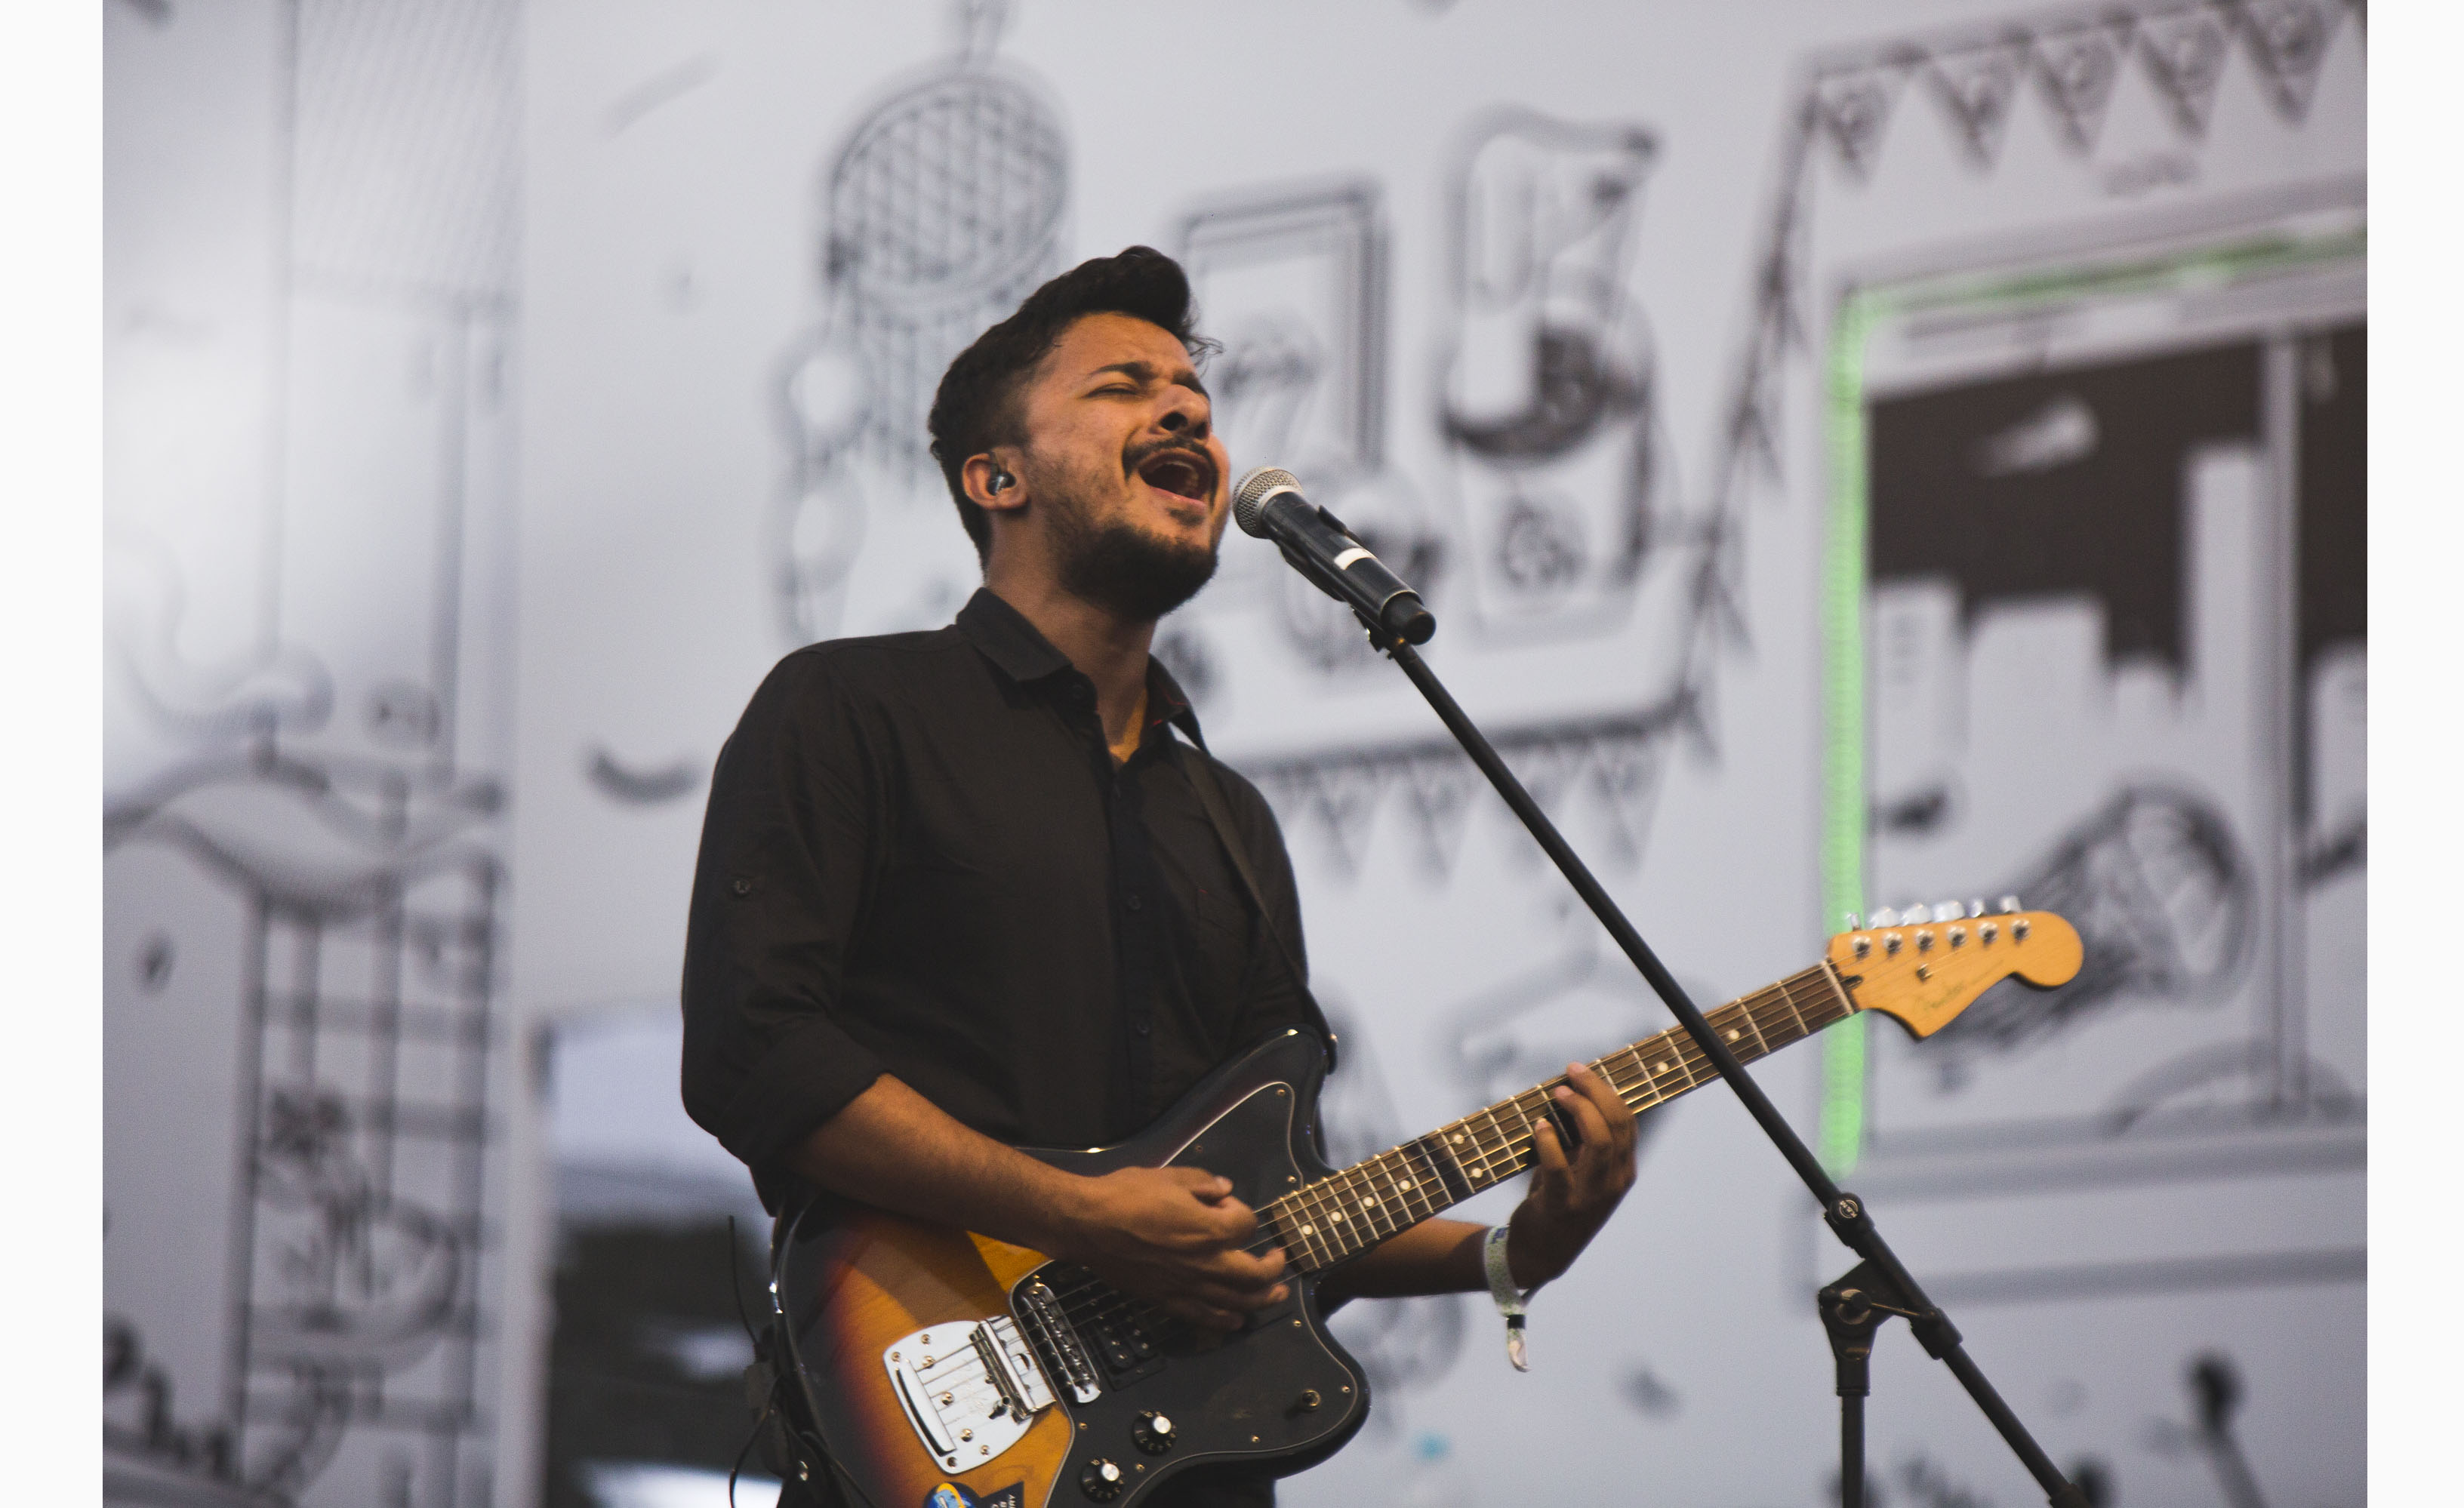 Aswekeepsearching performance on Day 2 of Bacardi NH7 Weekender Pune. Photo Credit - Parizad D